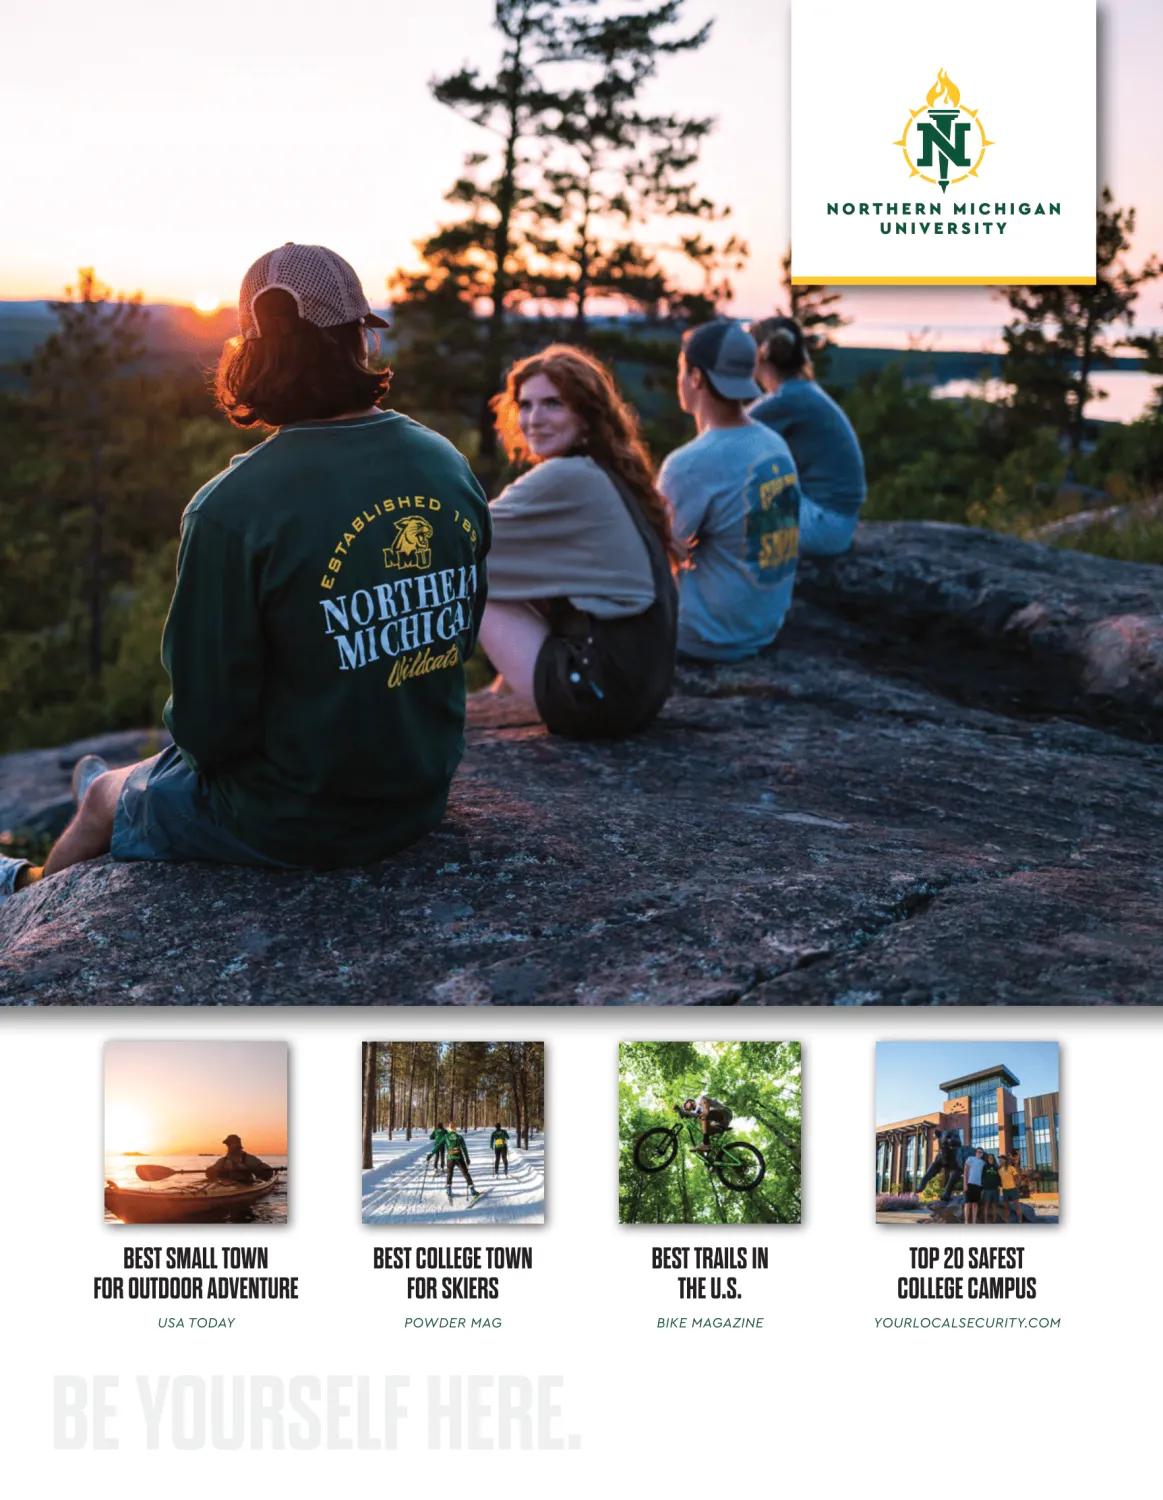 NMU Print Ad students on top of a mountain admiring the scenery below